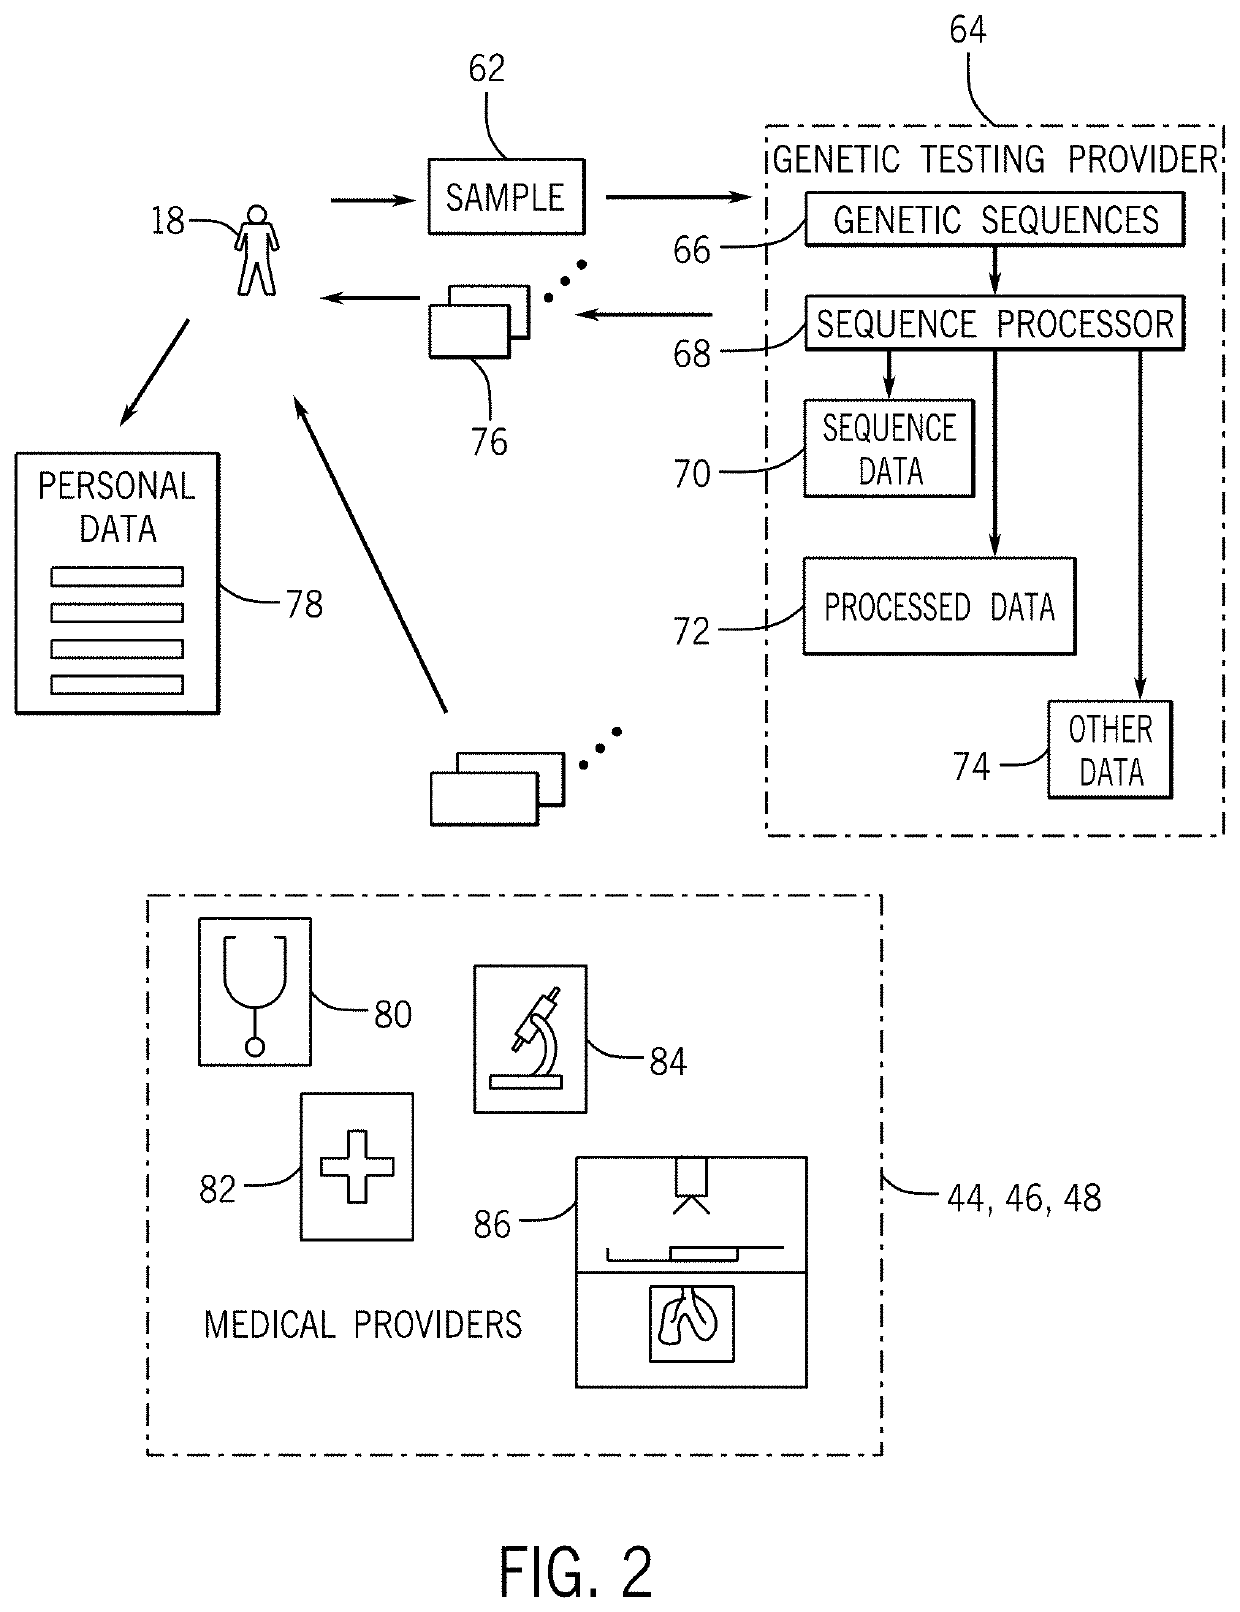 De-identification omic data aggregation platform with permitted third party access